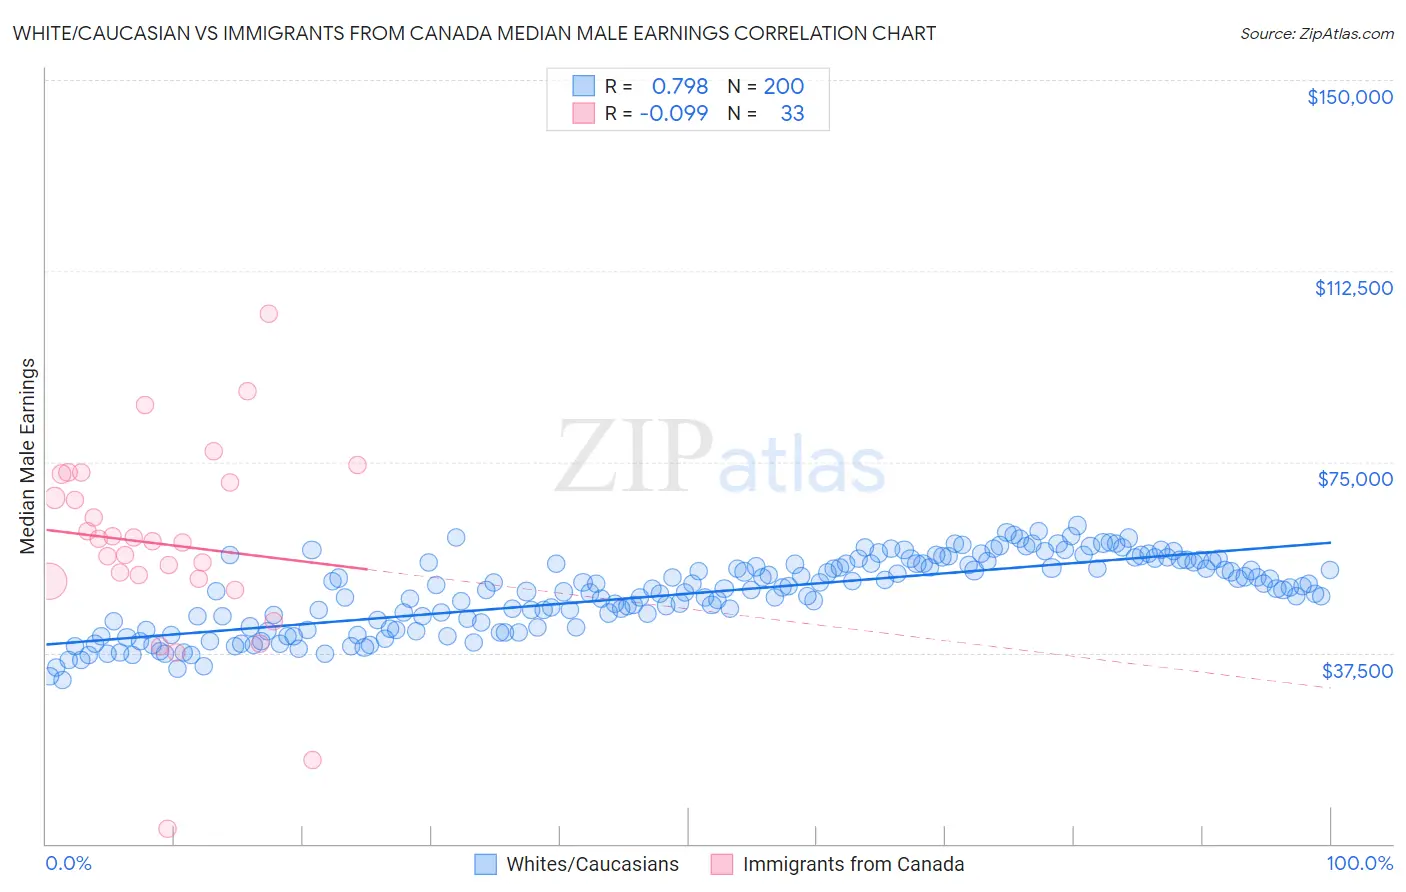 White/Caucasian vs Immigrants from Canada Median Male Earnings